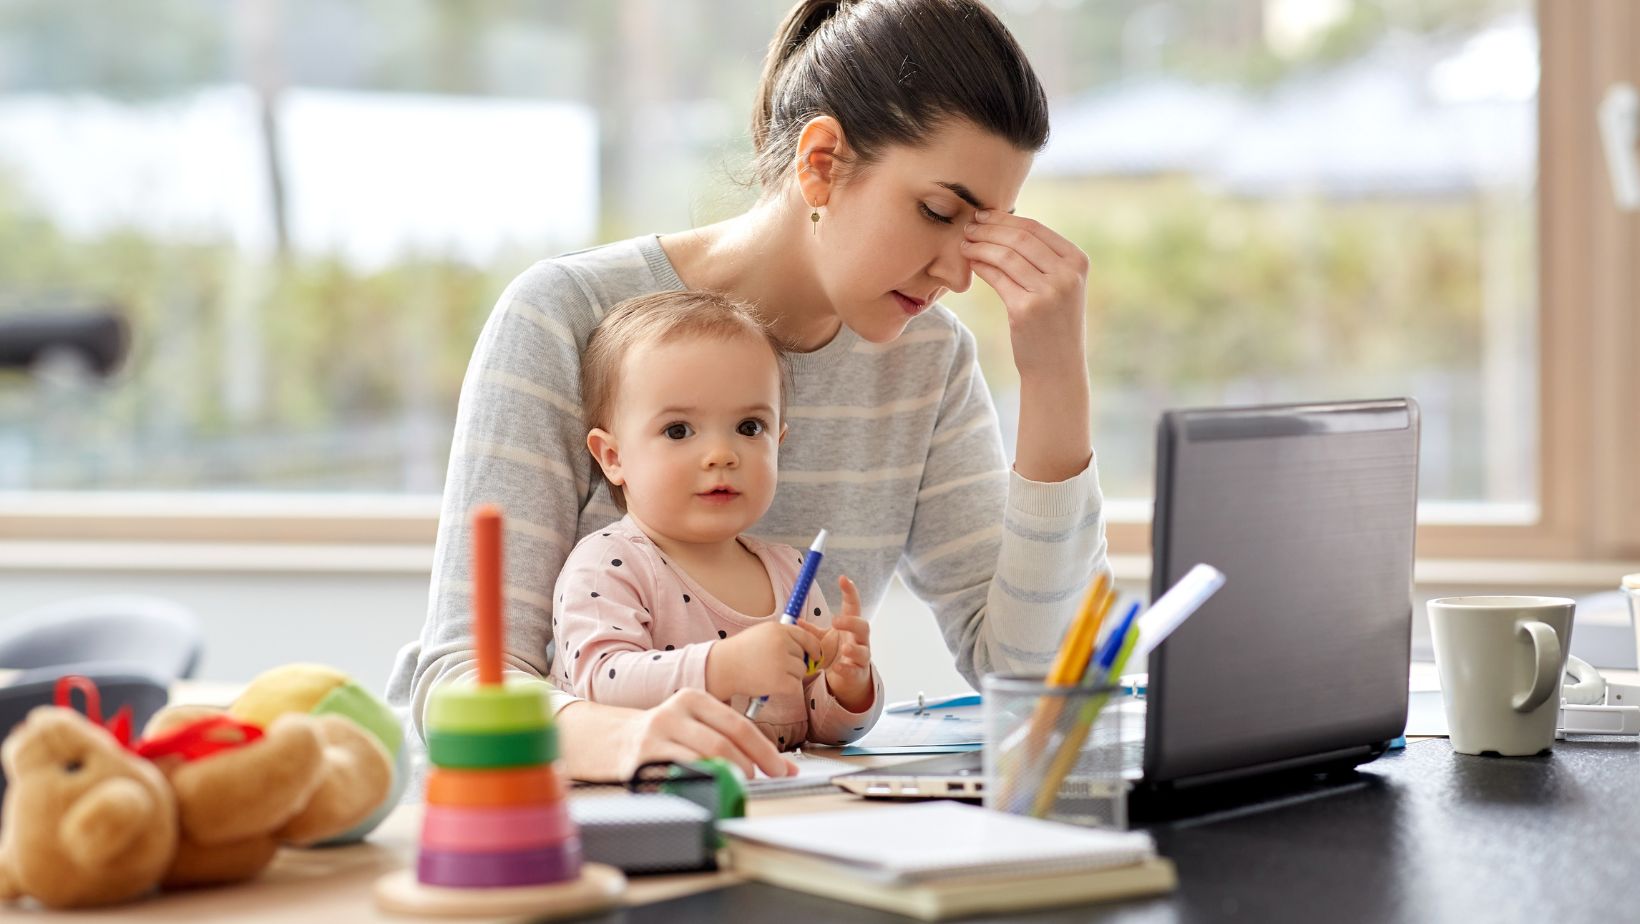 How To Balance Work And A New Baby